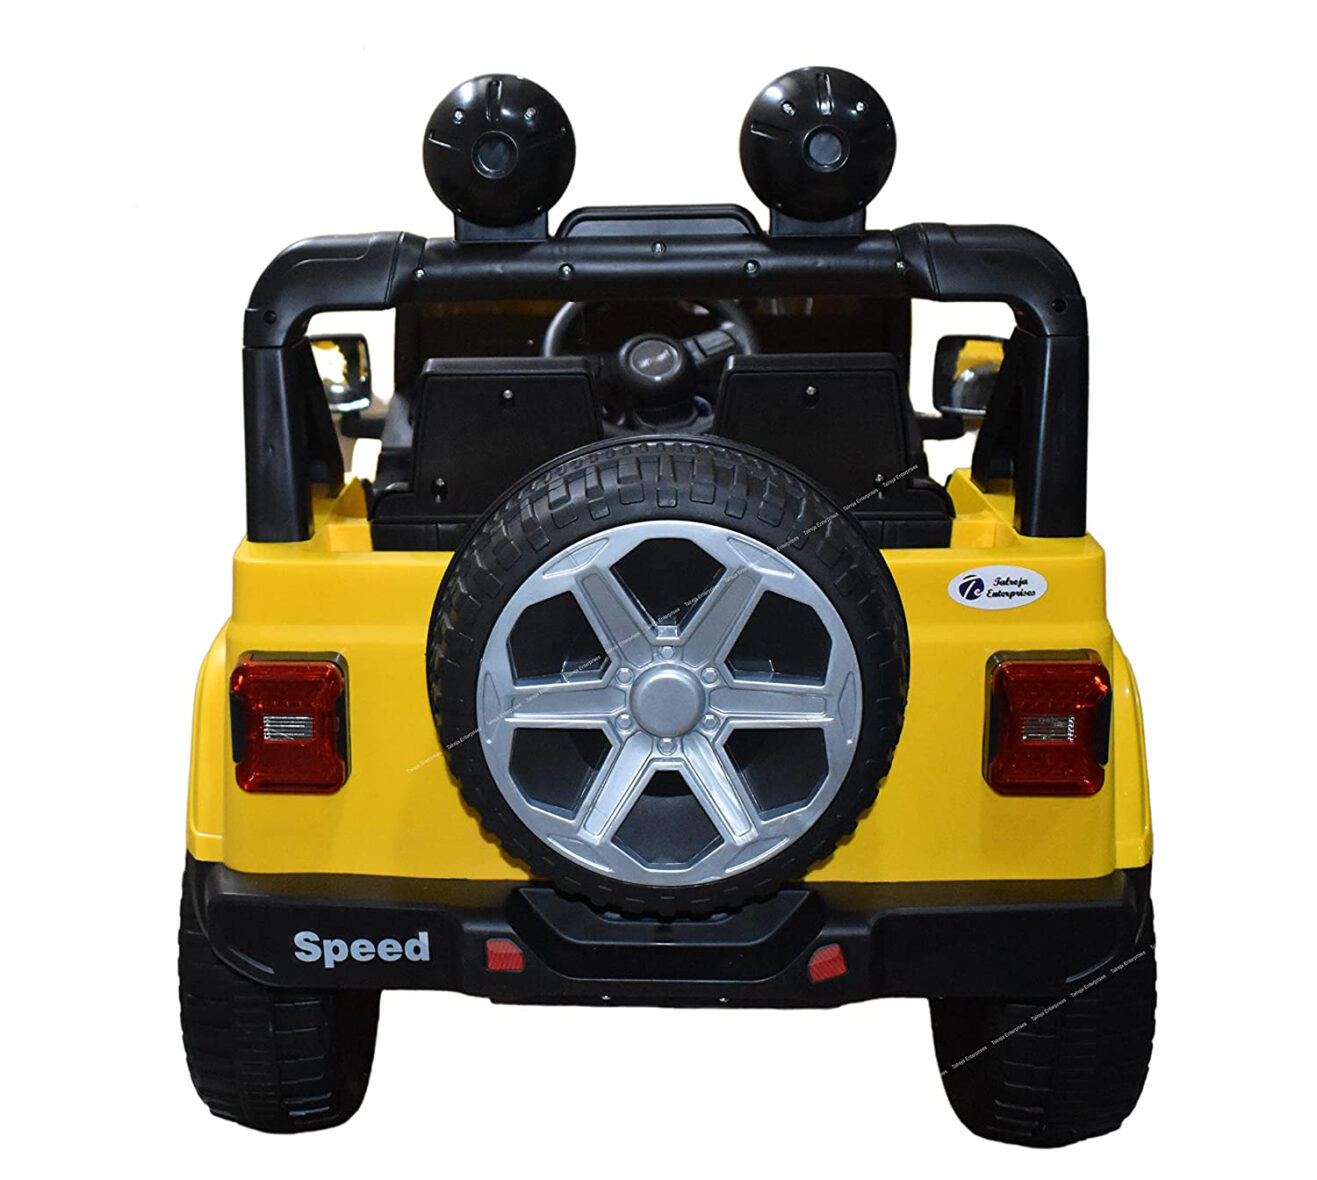 U Smile Ride on Jeep FT-938, Double Battery and Double Motor – Rechargeable (Yellow)